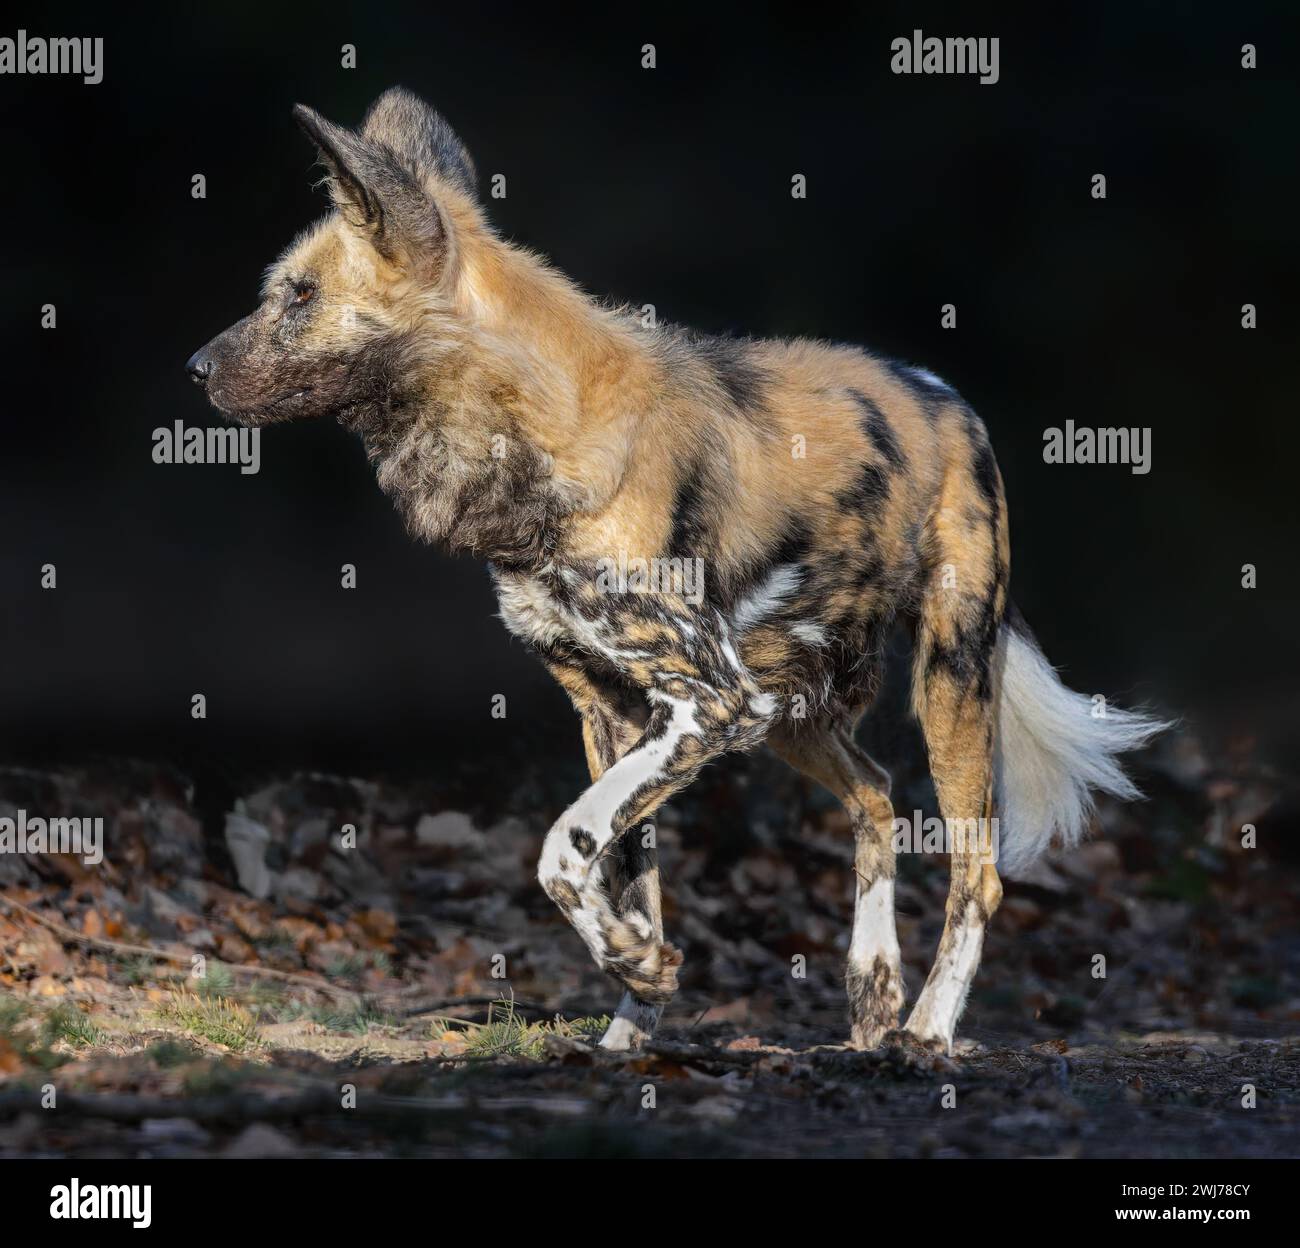 Close up view of an African wild dog (Lycaon pictus) Stock Photo